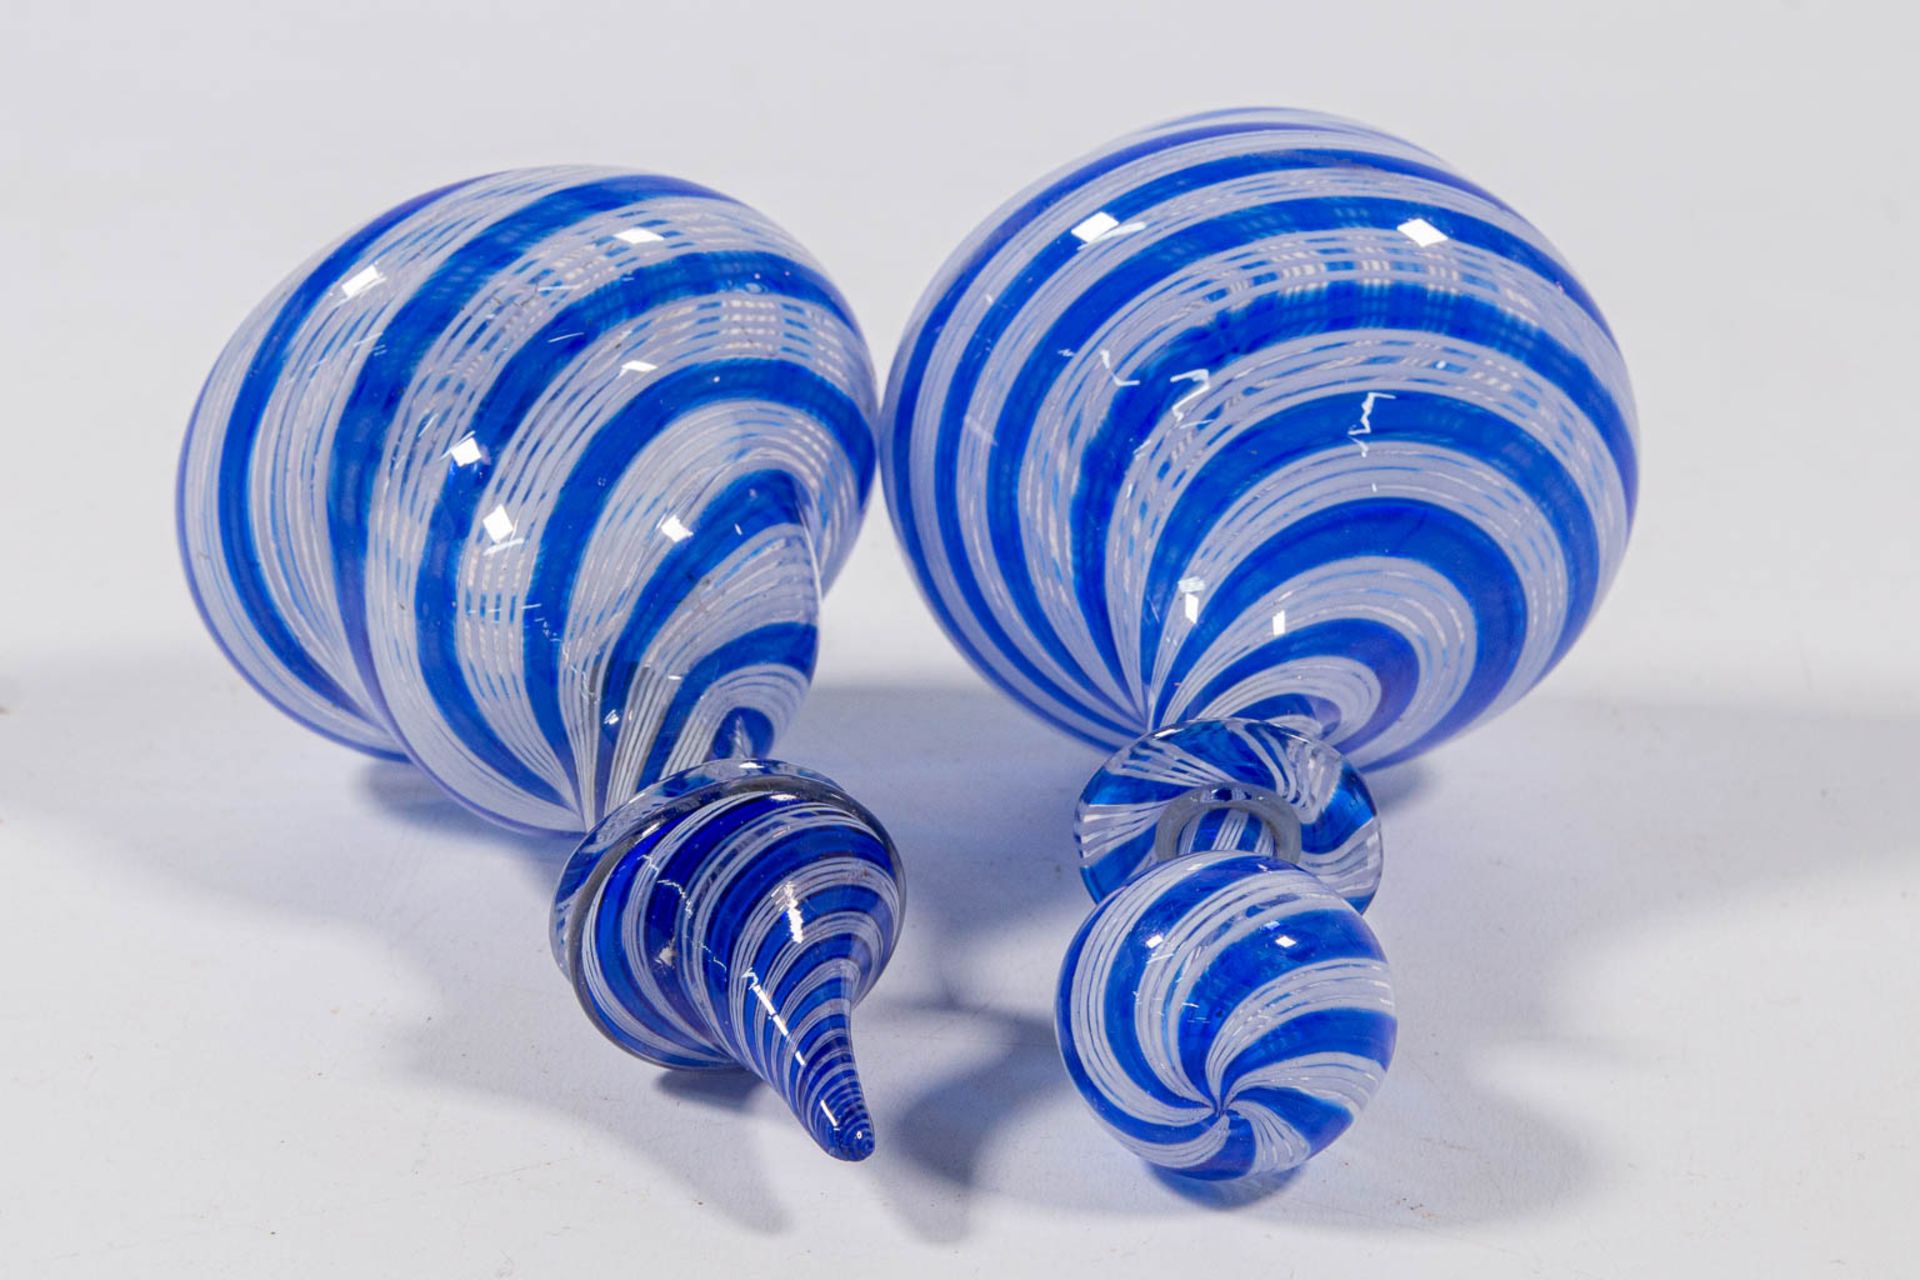 A pair of decanters with stopper, made in Murano, Italy around 1950. (15 x 9 cm) - Image 13 of 17